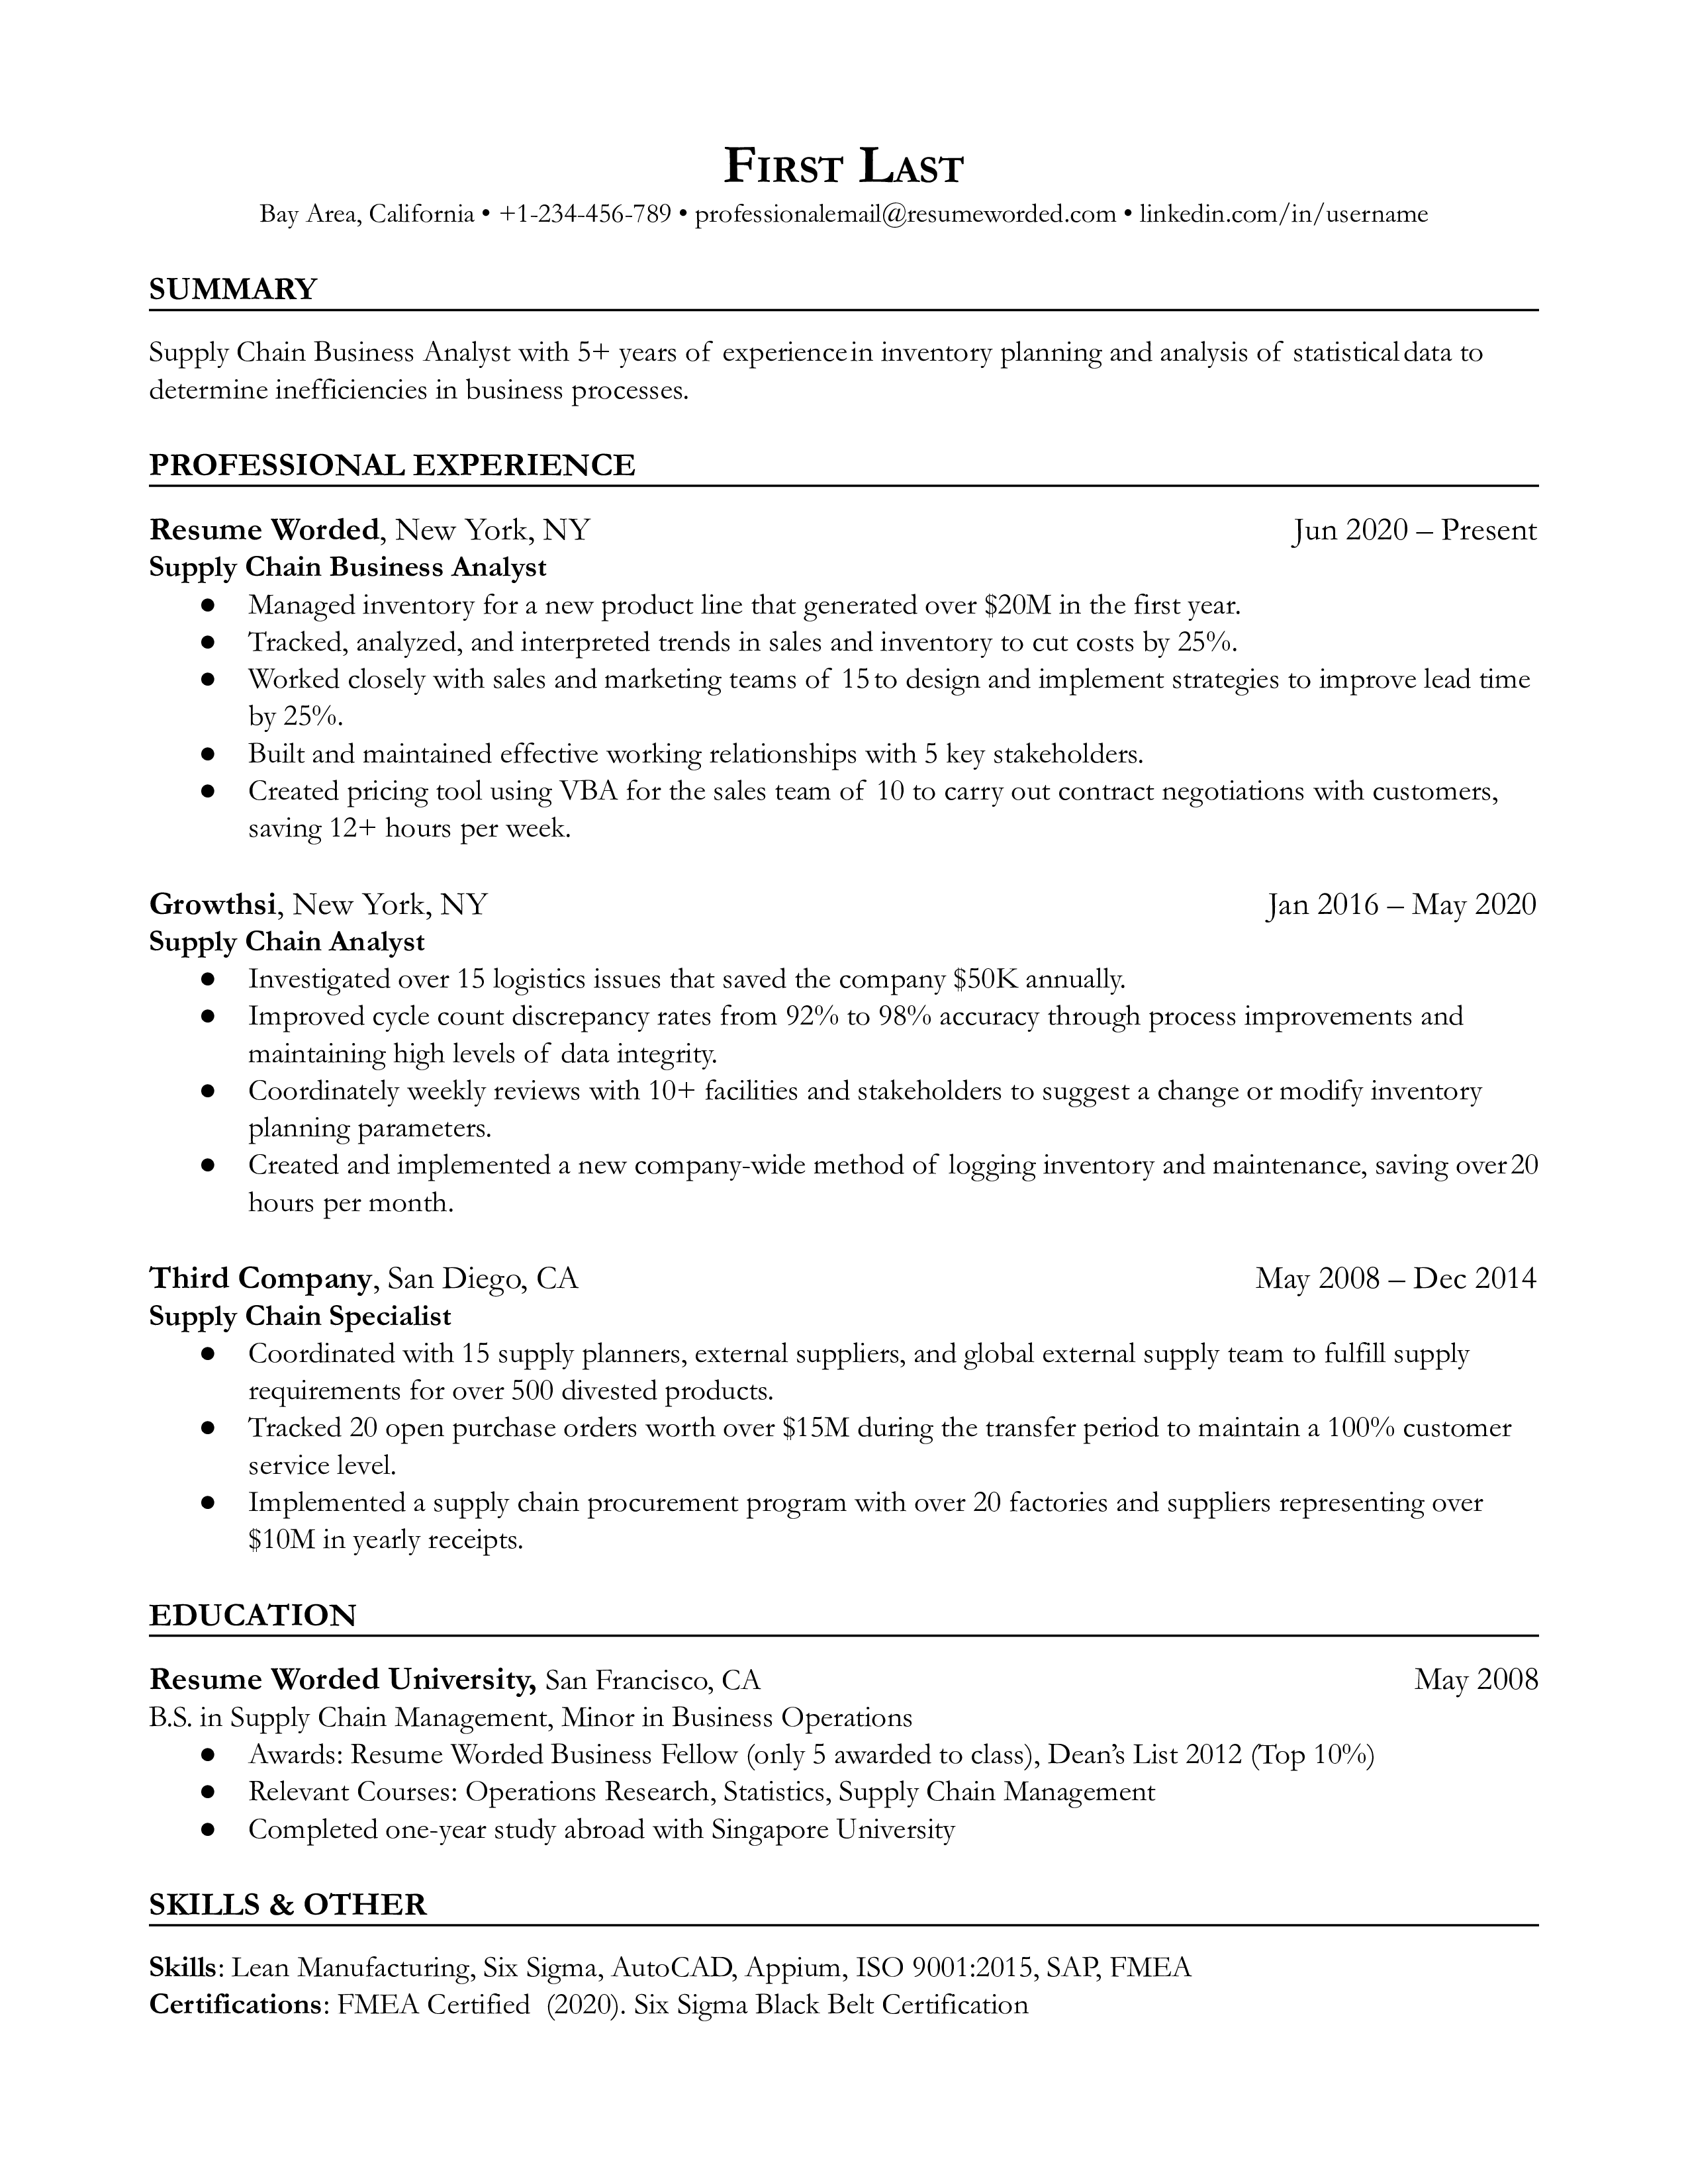 A supply chain business analyst resume template prioritizing logistics experience.